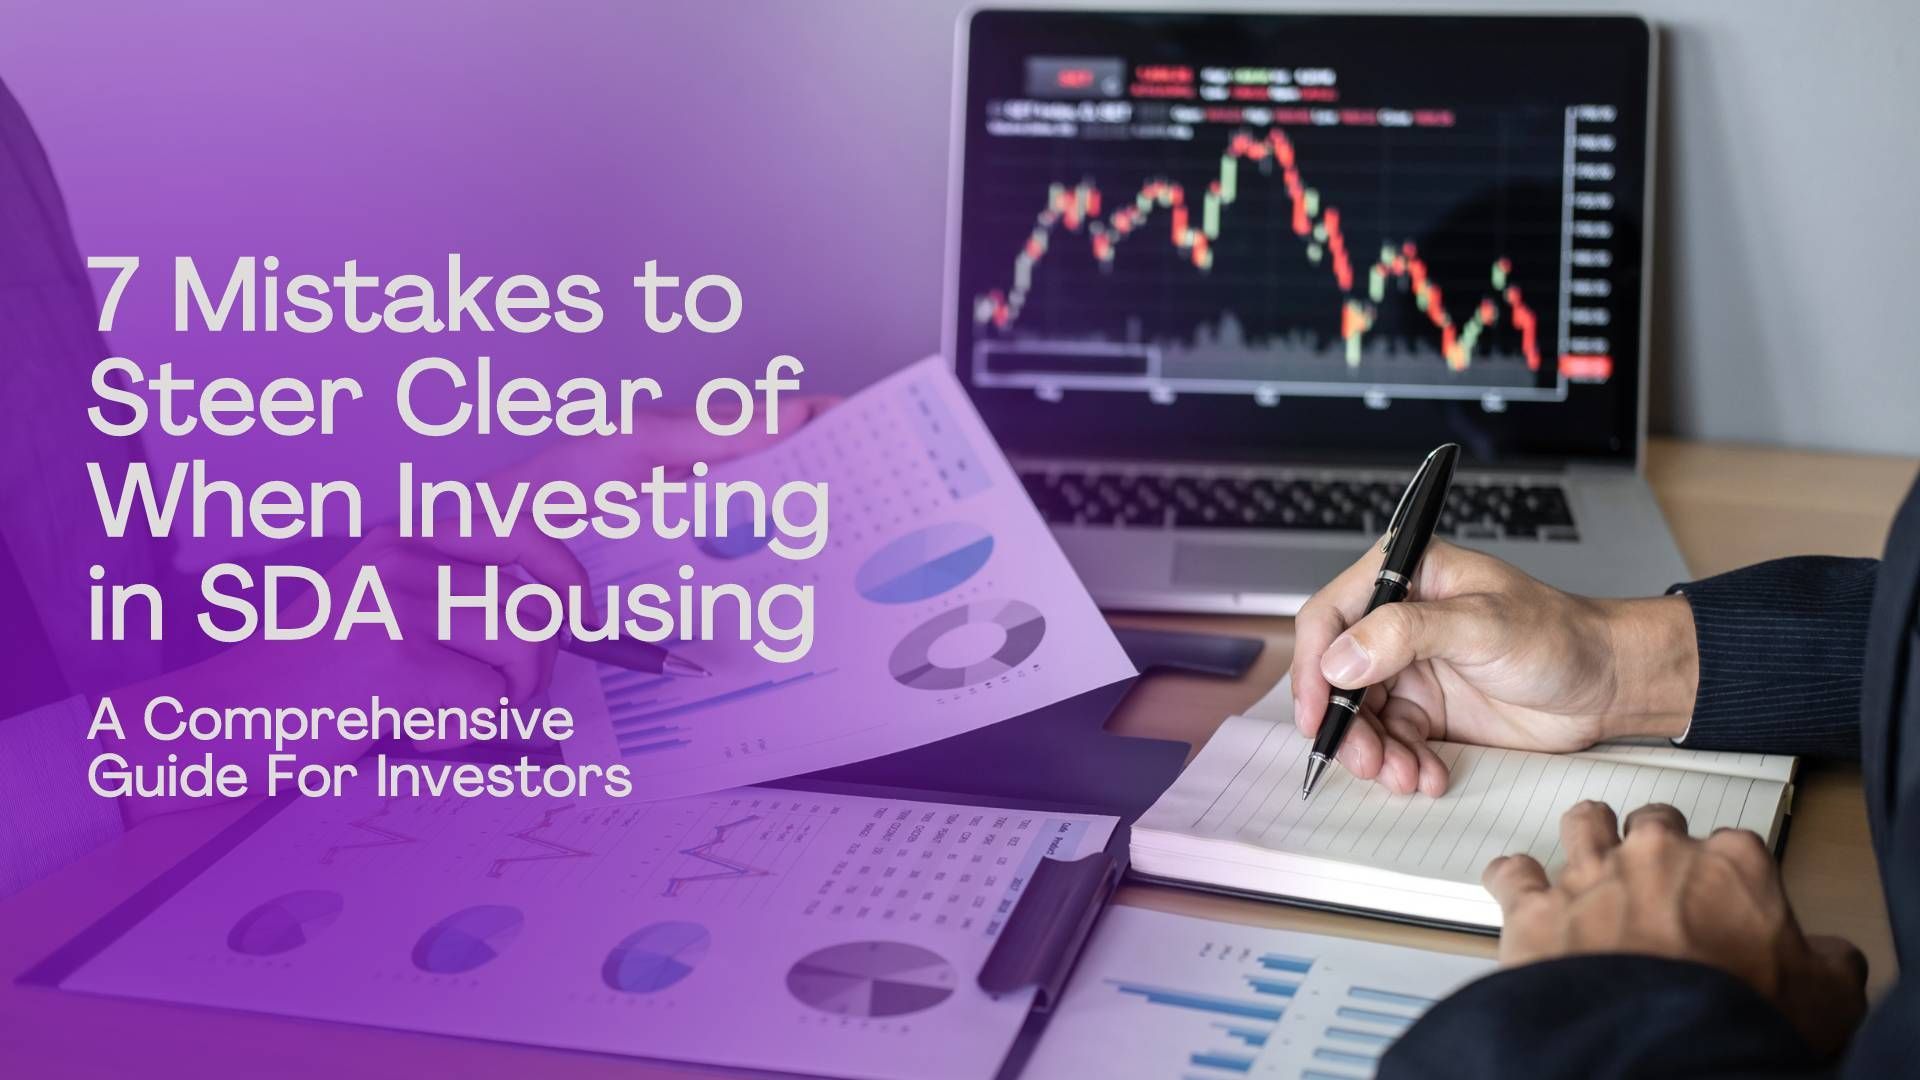 Mistakes Investing in SDA Housing